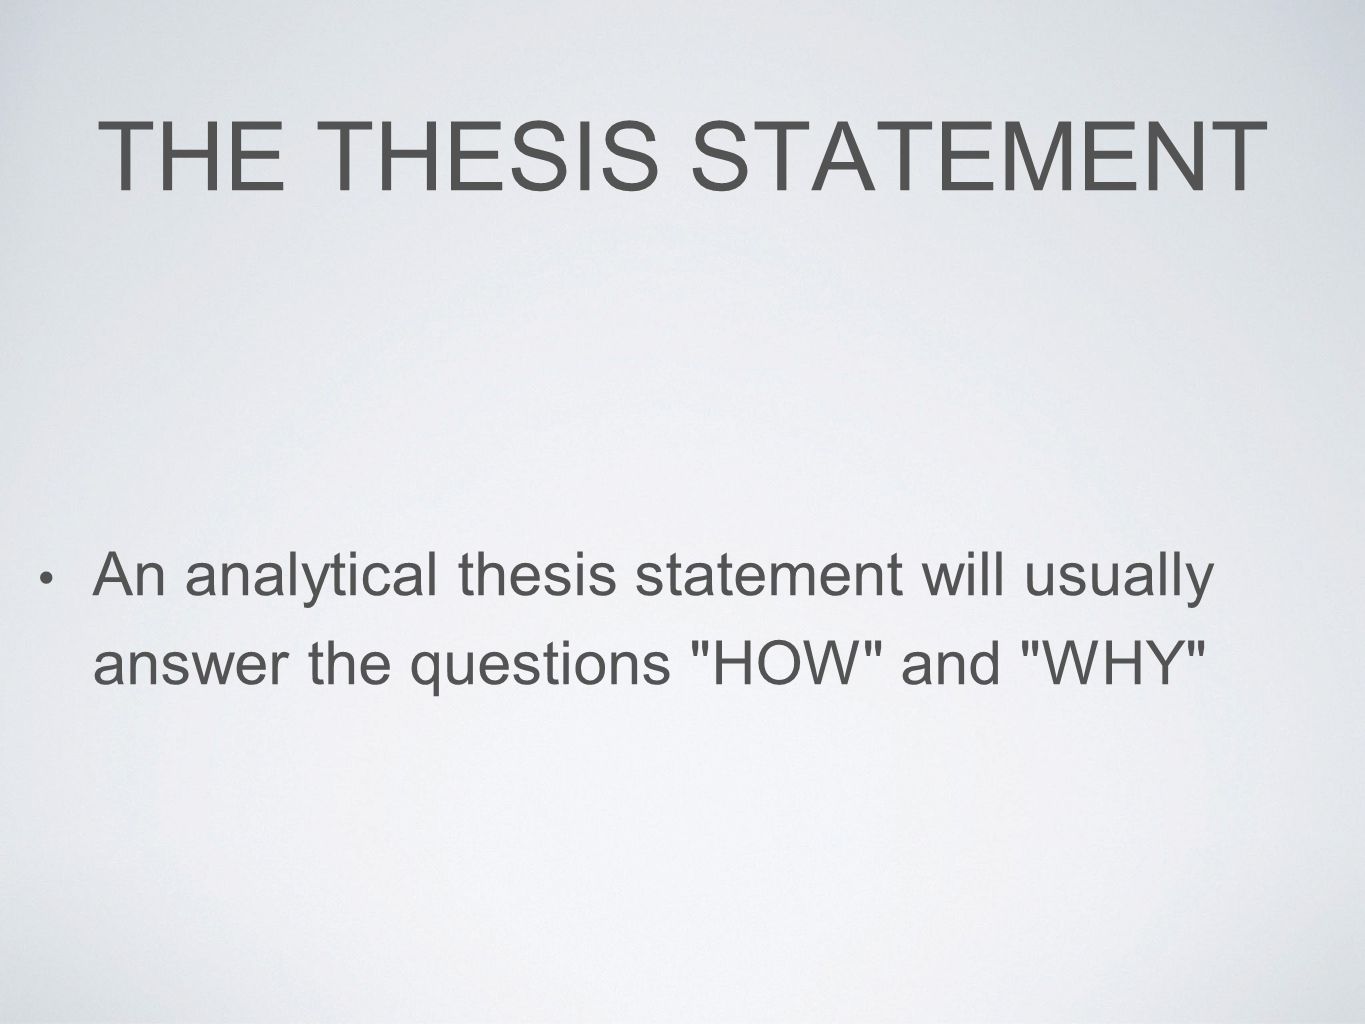 Analytical thesis statement definition